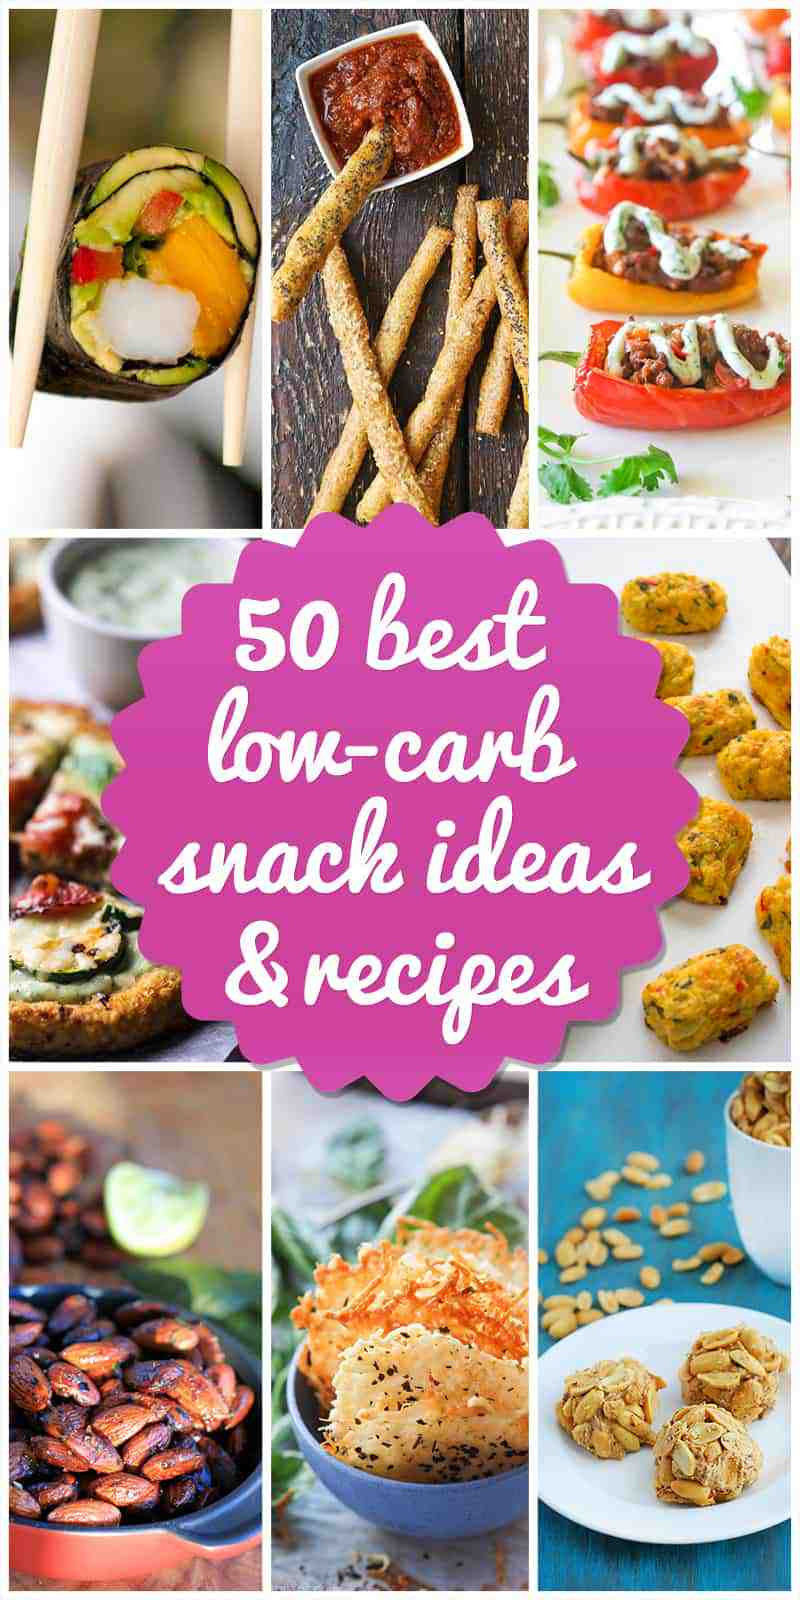 Snacks For Low Carb Diet
 50 Low Carb Snack Ideas and Recipes for 2018